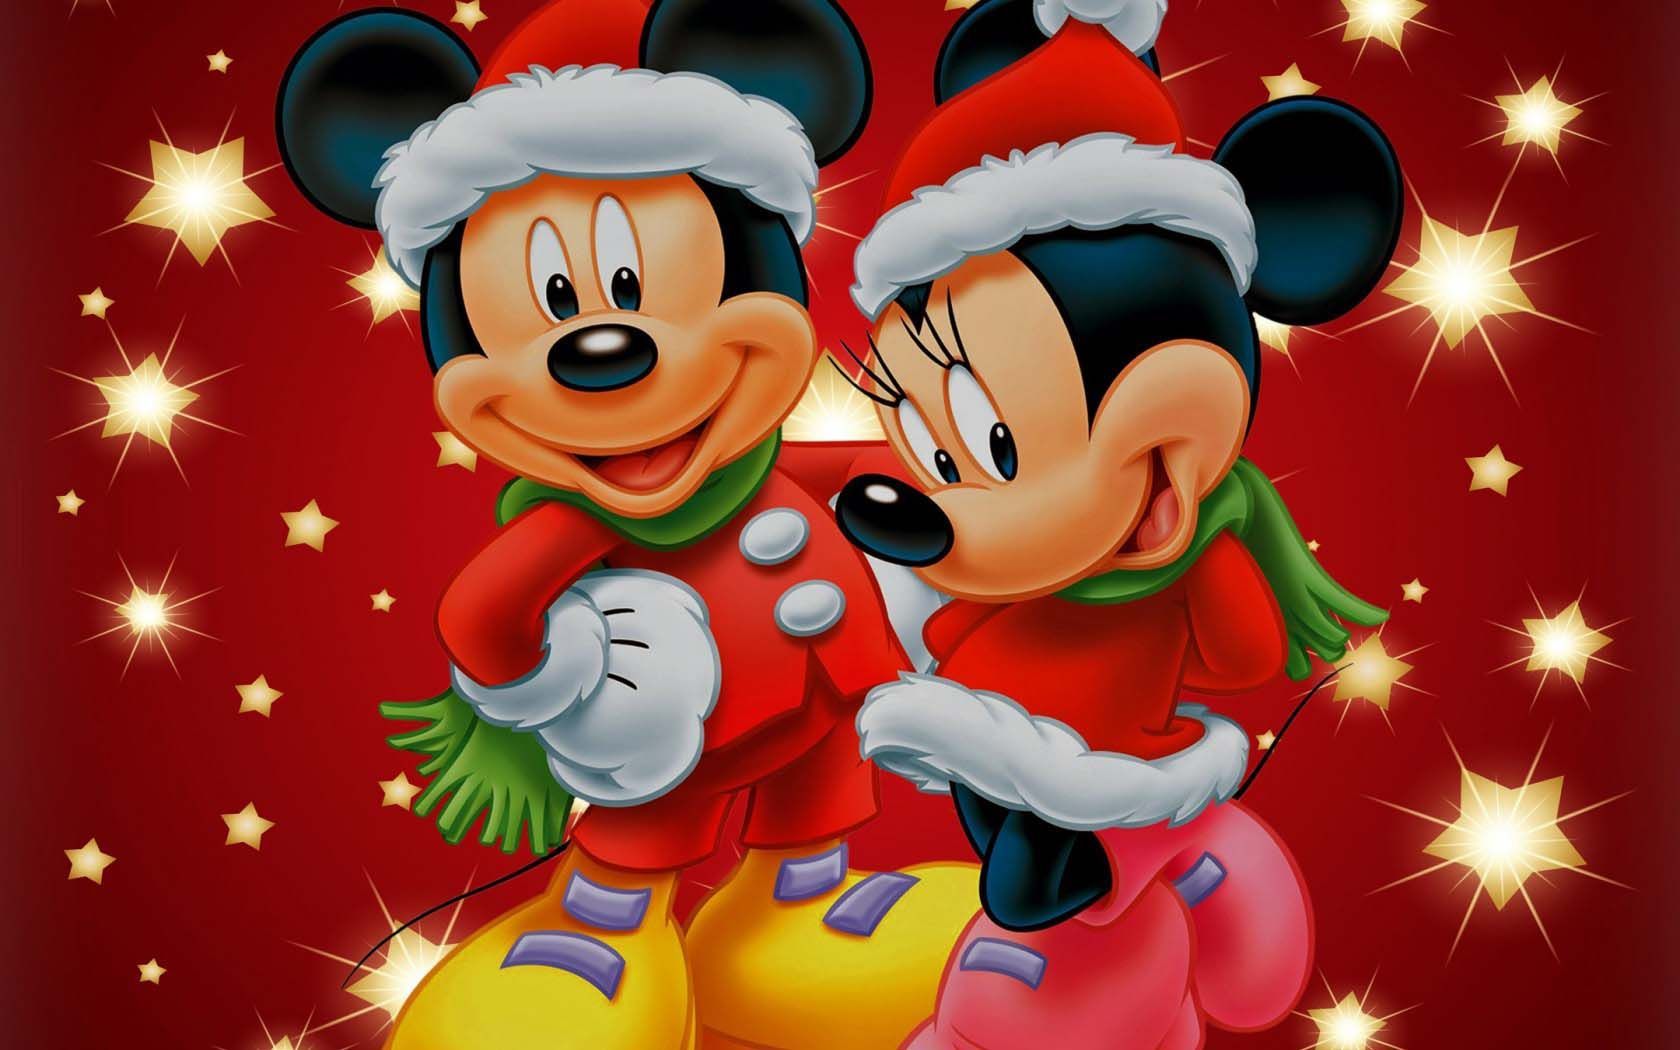 Mickey Mouse enjoying Christmas Wallpaper in HD. Mickey mouse